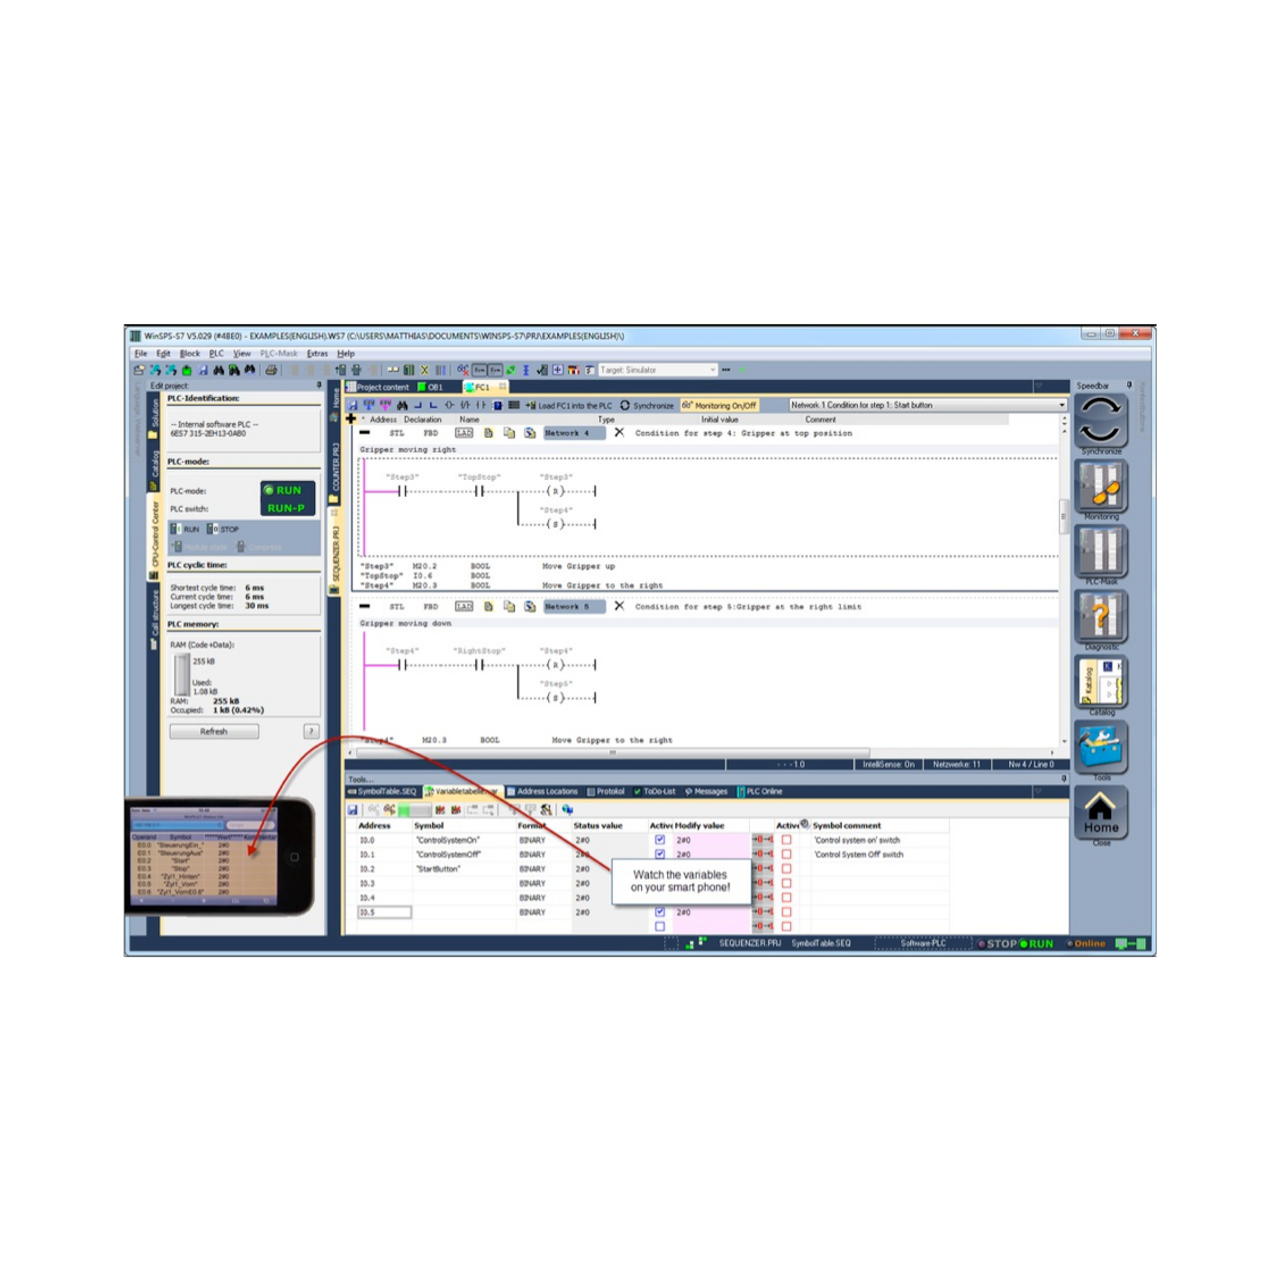 ROPRO Download - The ROPRO software program is a tool for